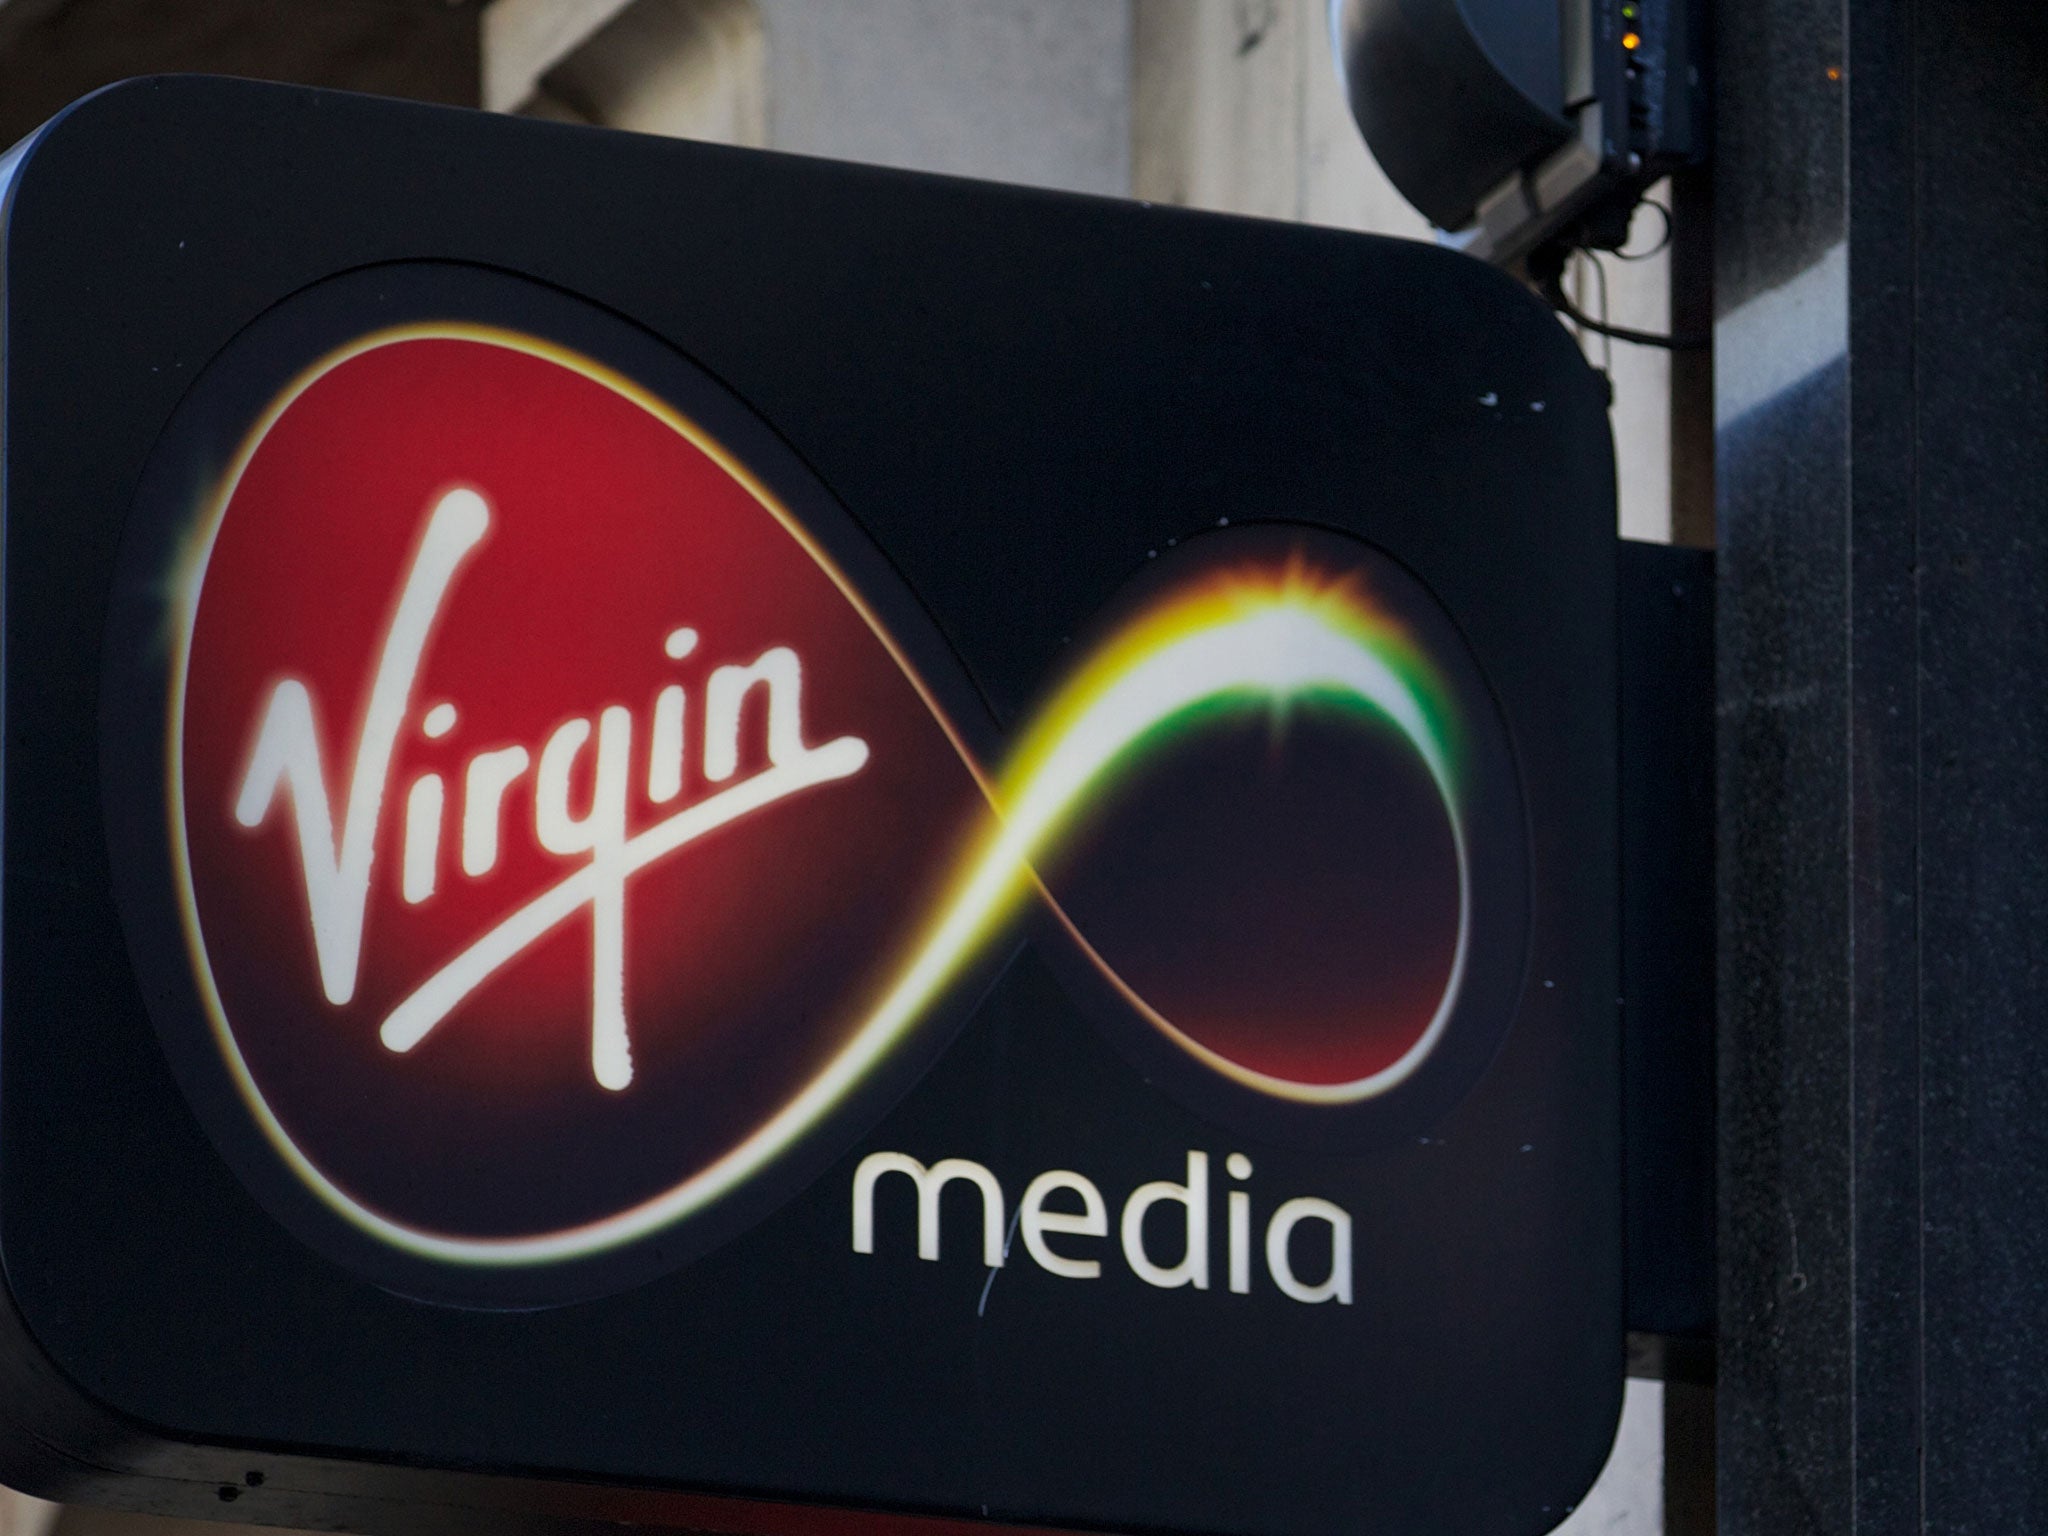 Virgin Media have since apologised to the family for sending the bill.